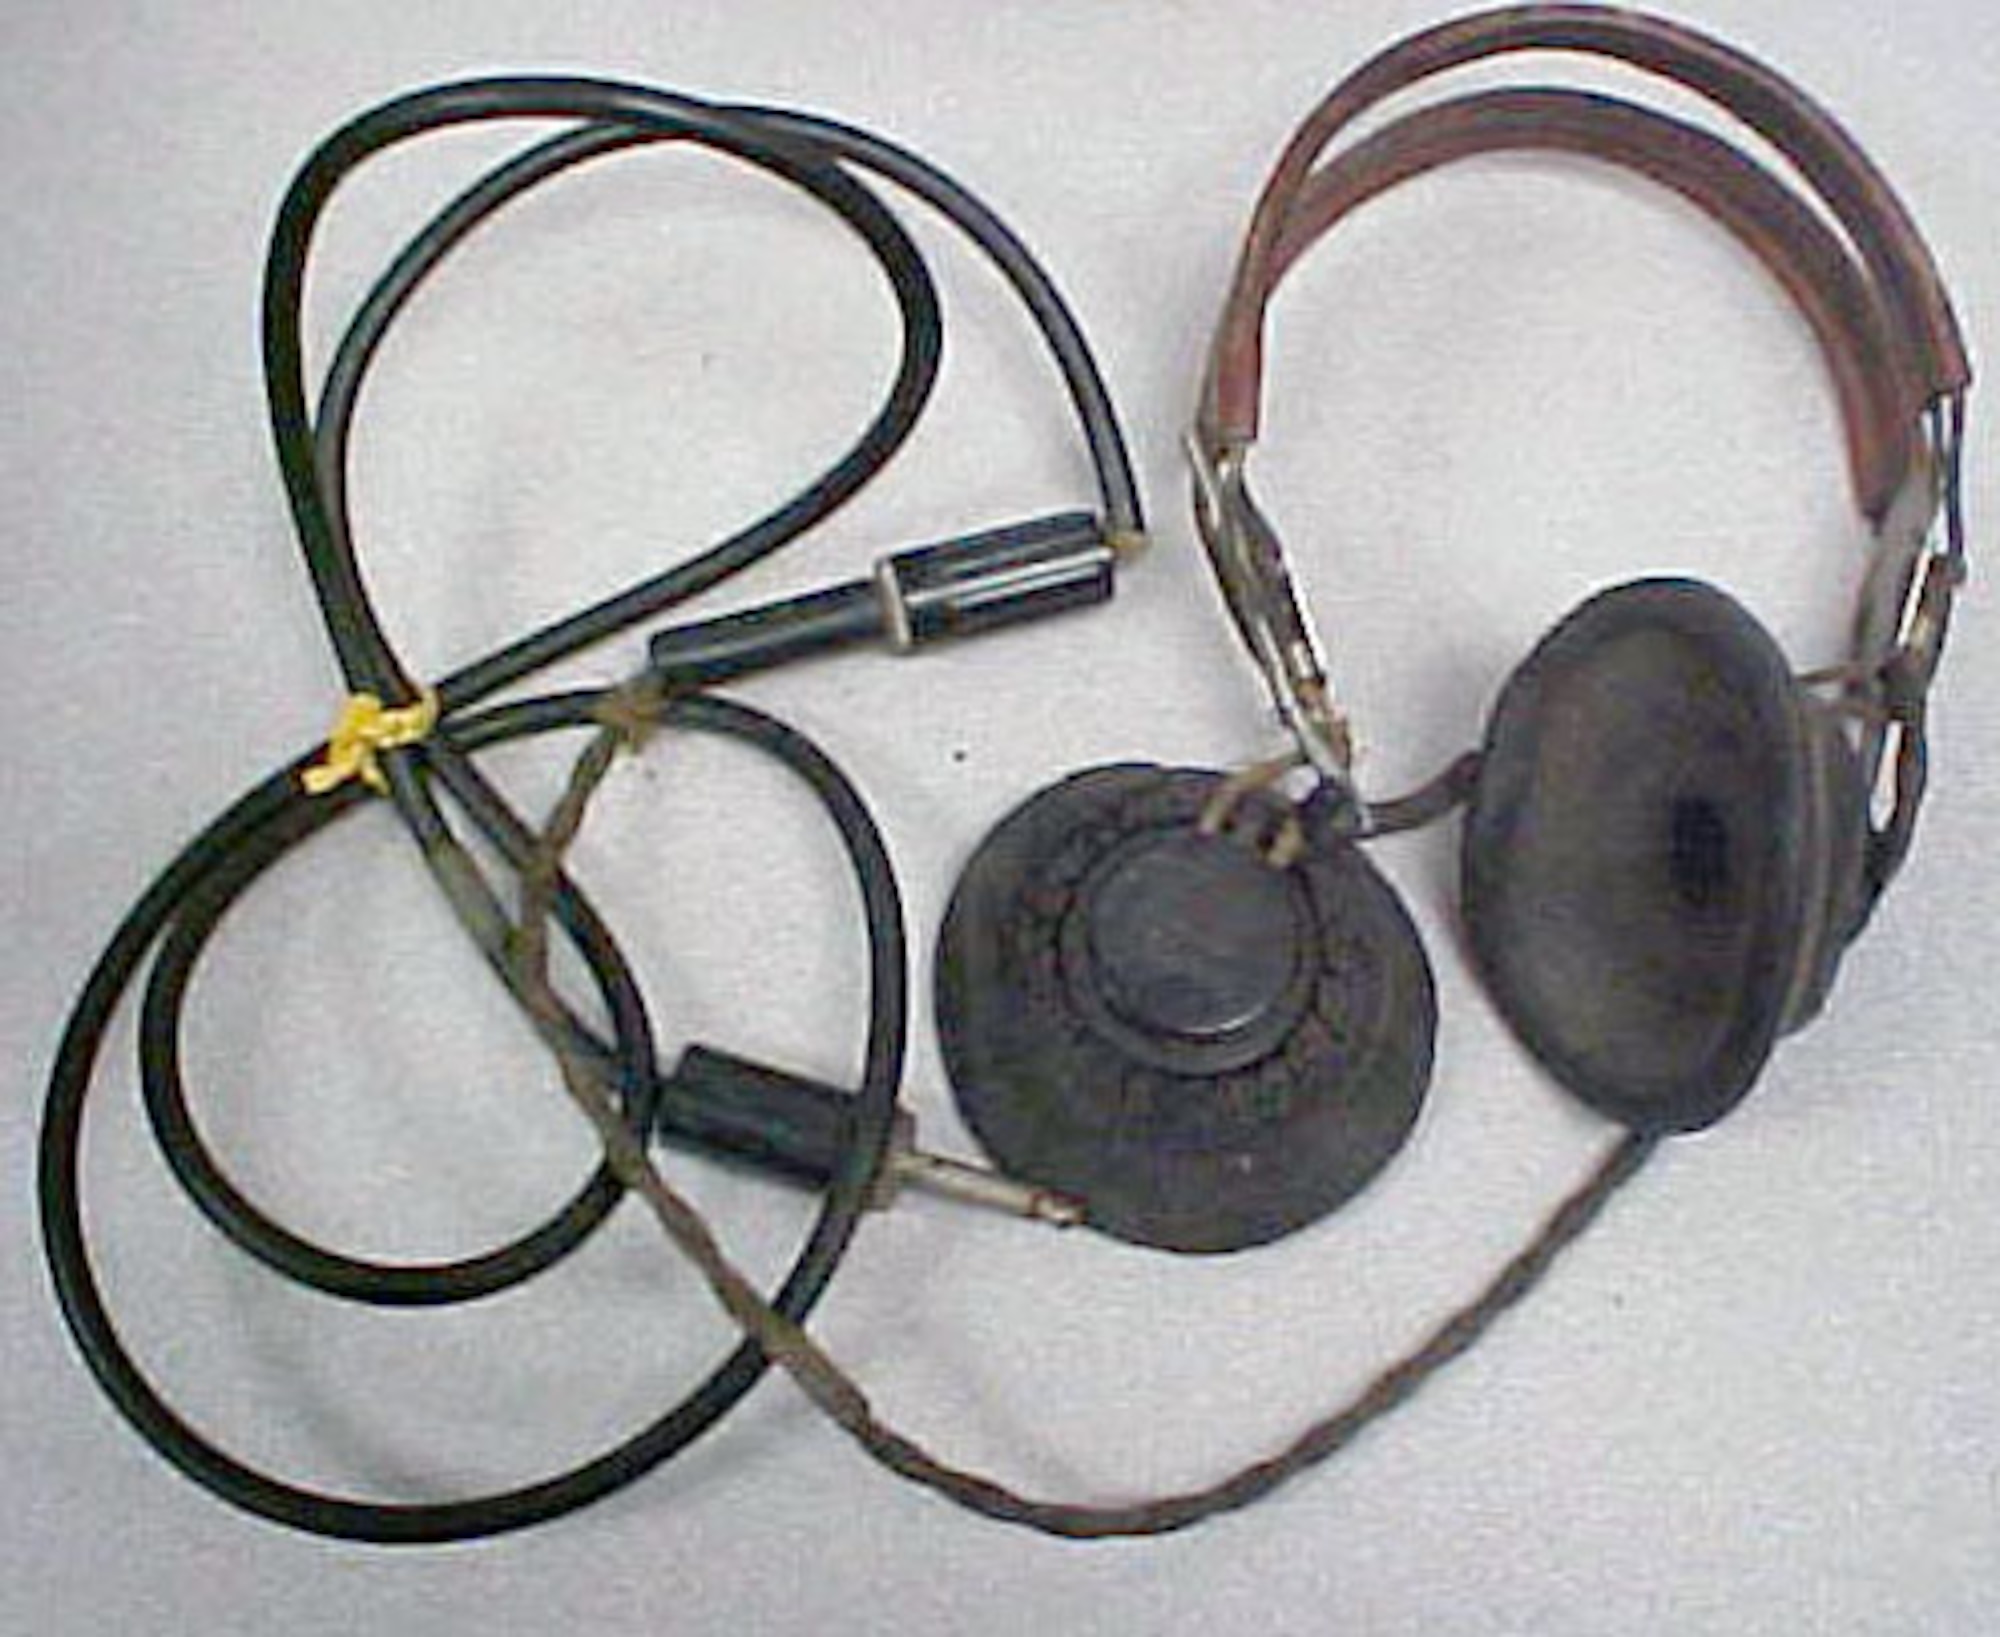 This headset was owned and used by SSgt. Frank P. Cicerello, who was Gen. Douglas MacArthur's radio operator. (U.S. Air Force photo)